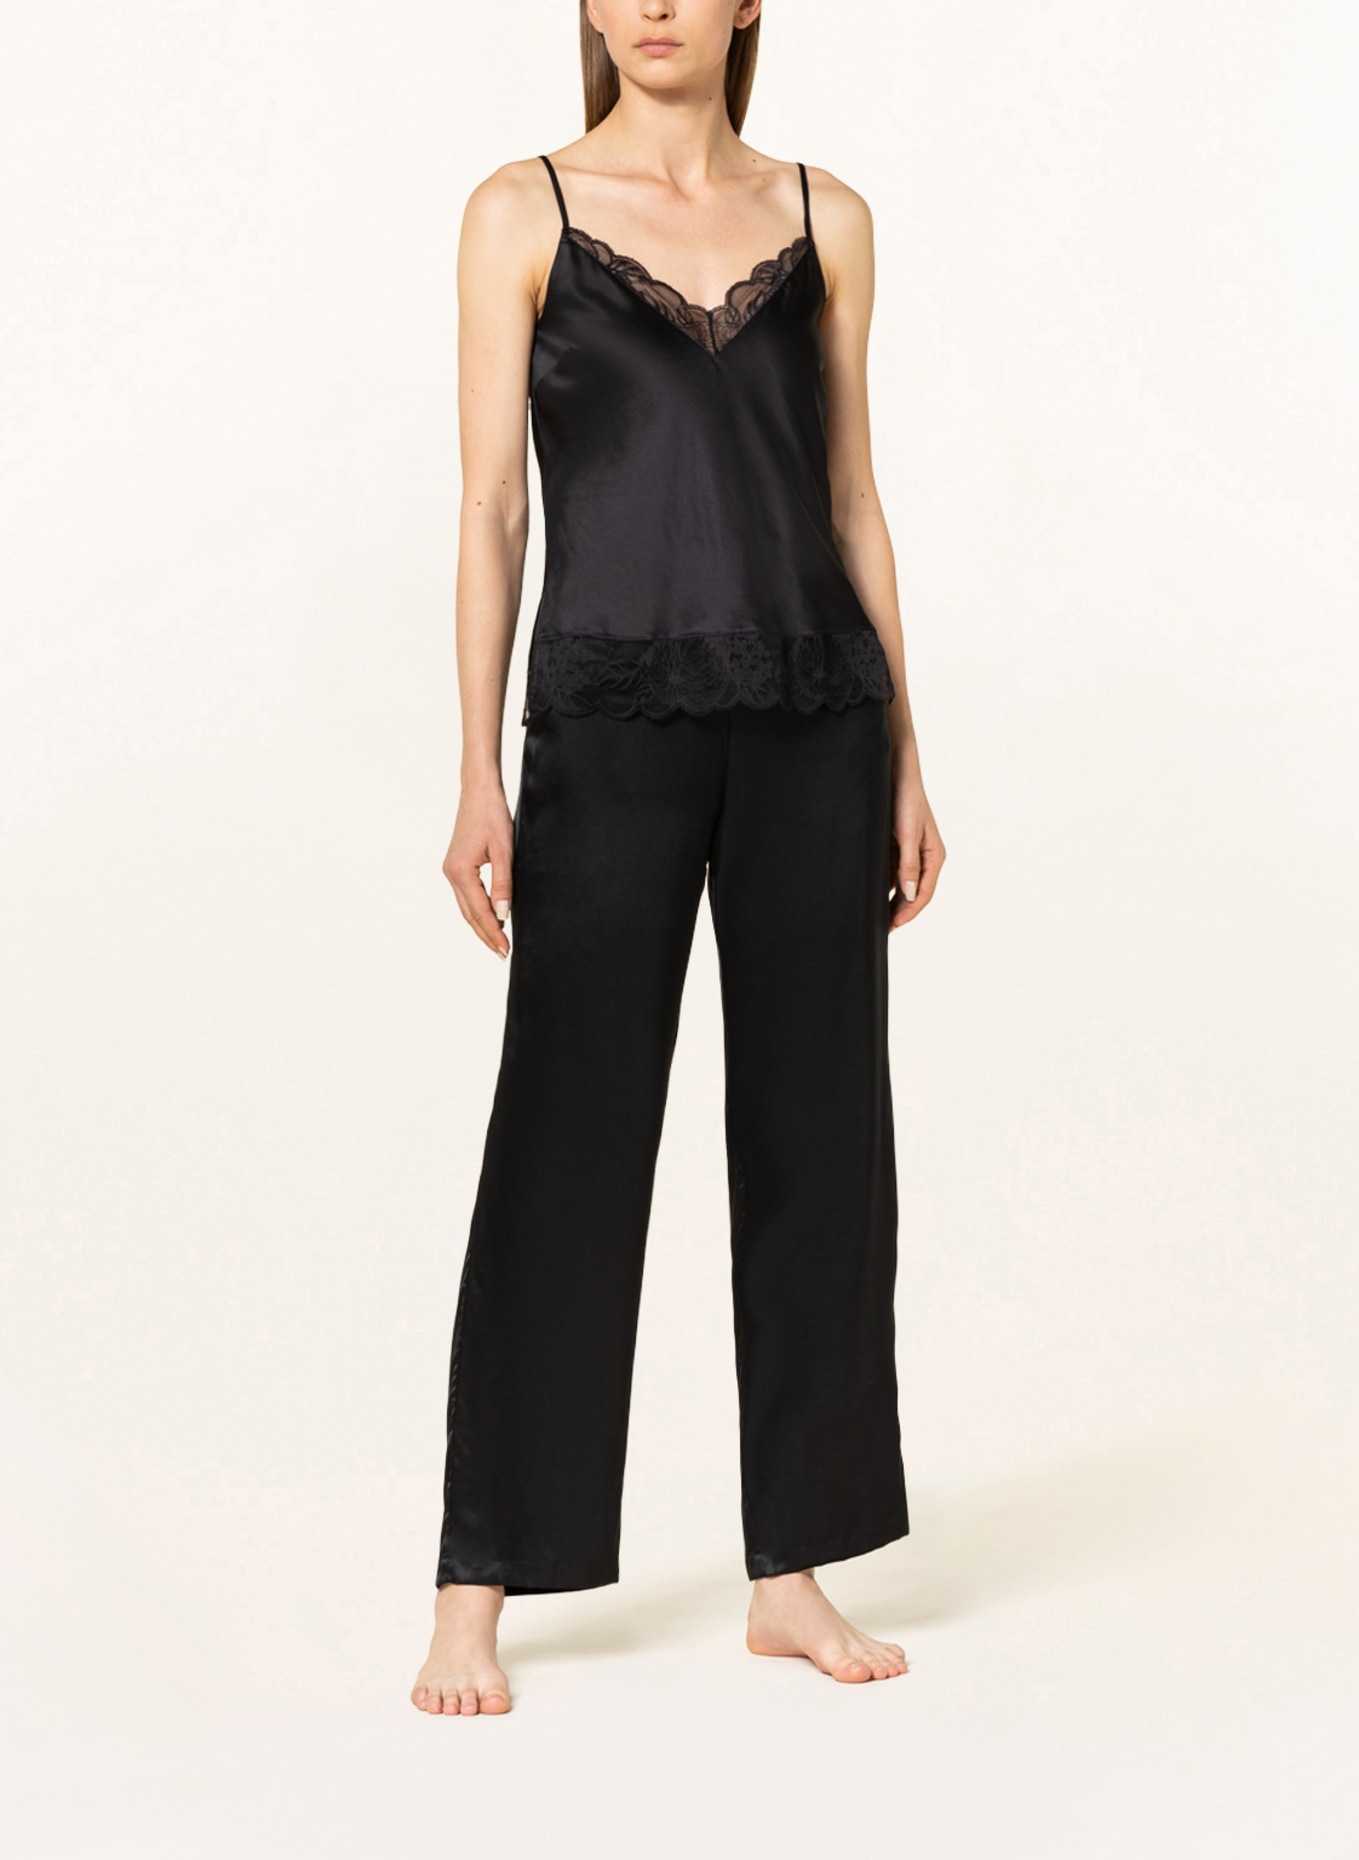 CHANTELLE Pajama top MIDNIGHT FLOWERS made of satin, Color: BLACK (Image 2)